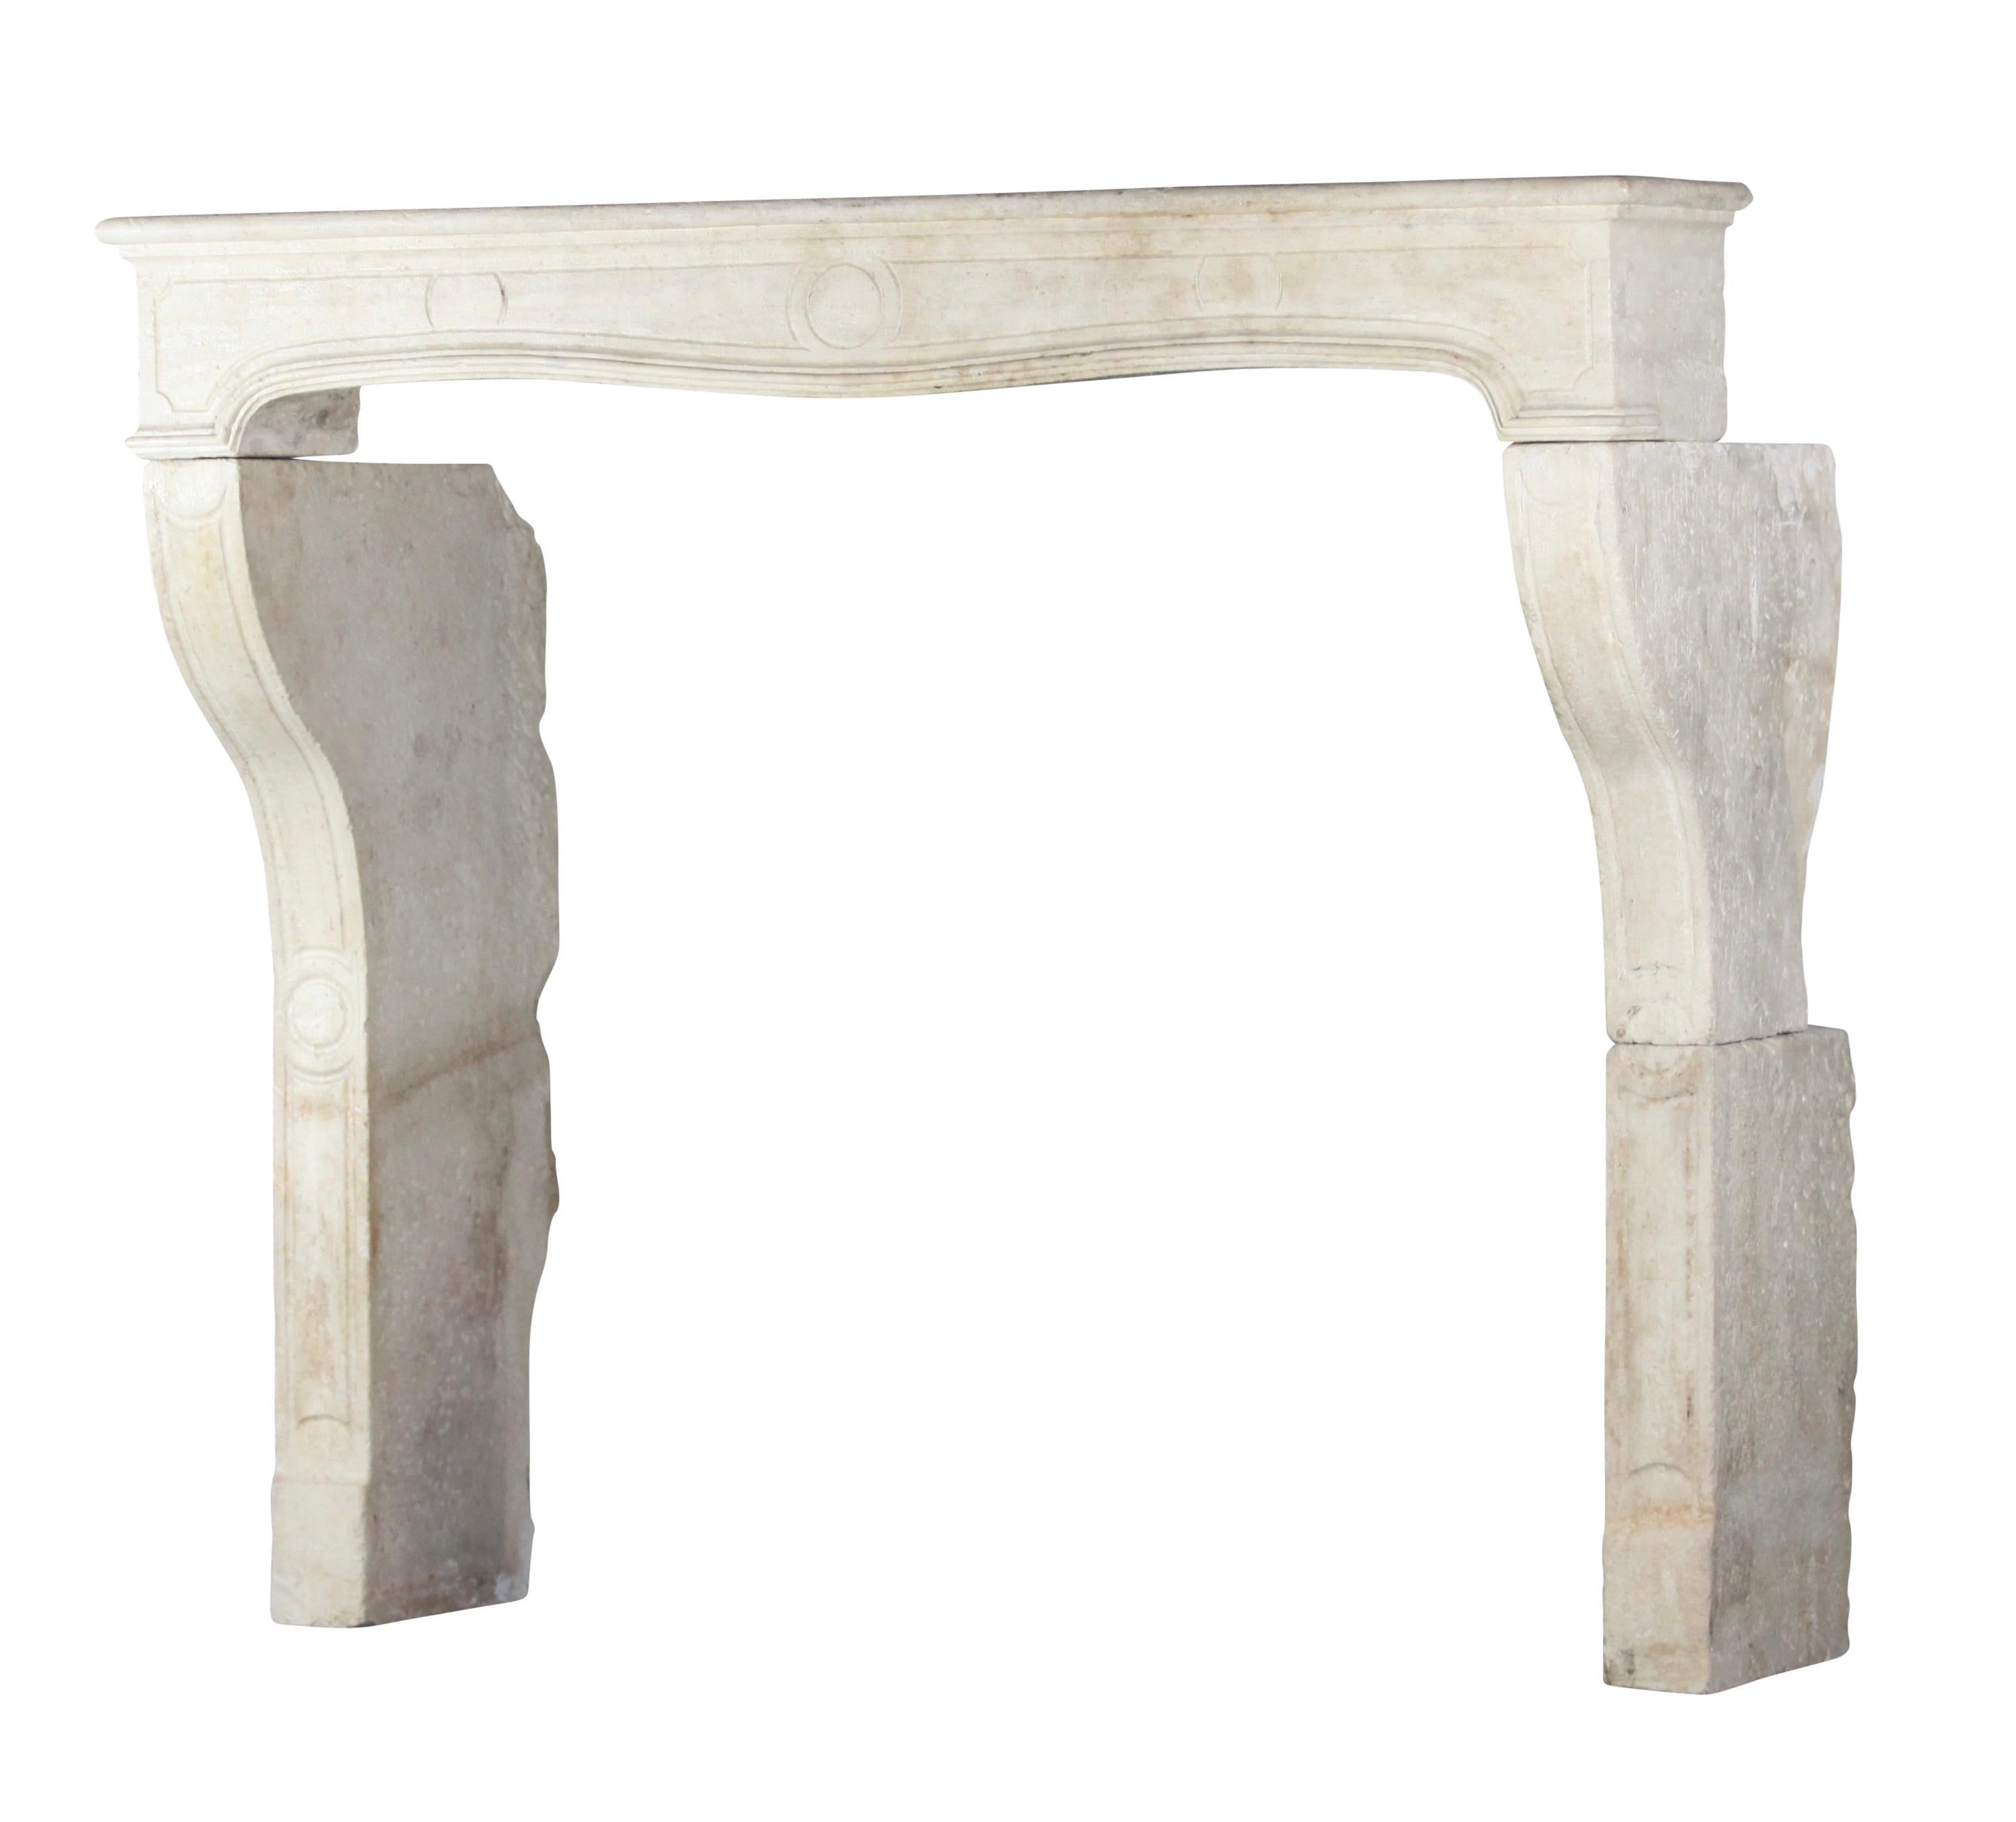 French 18th century period country style limestone fireplace surround. 
Elegant and not too rustic for a timeless modern interior design.
Measures:
181 cm exterior width 71,26 inch
157 cm exterior height 61,81 inch
148 cm interior width 58,27